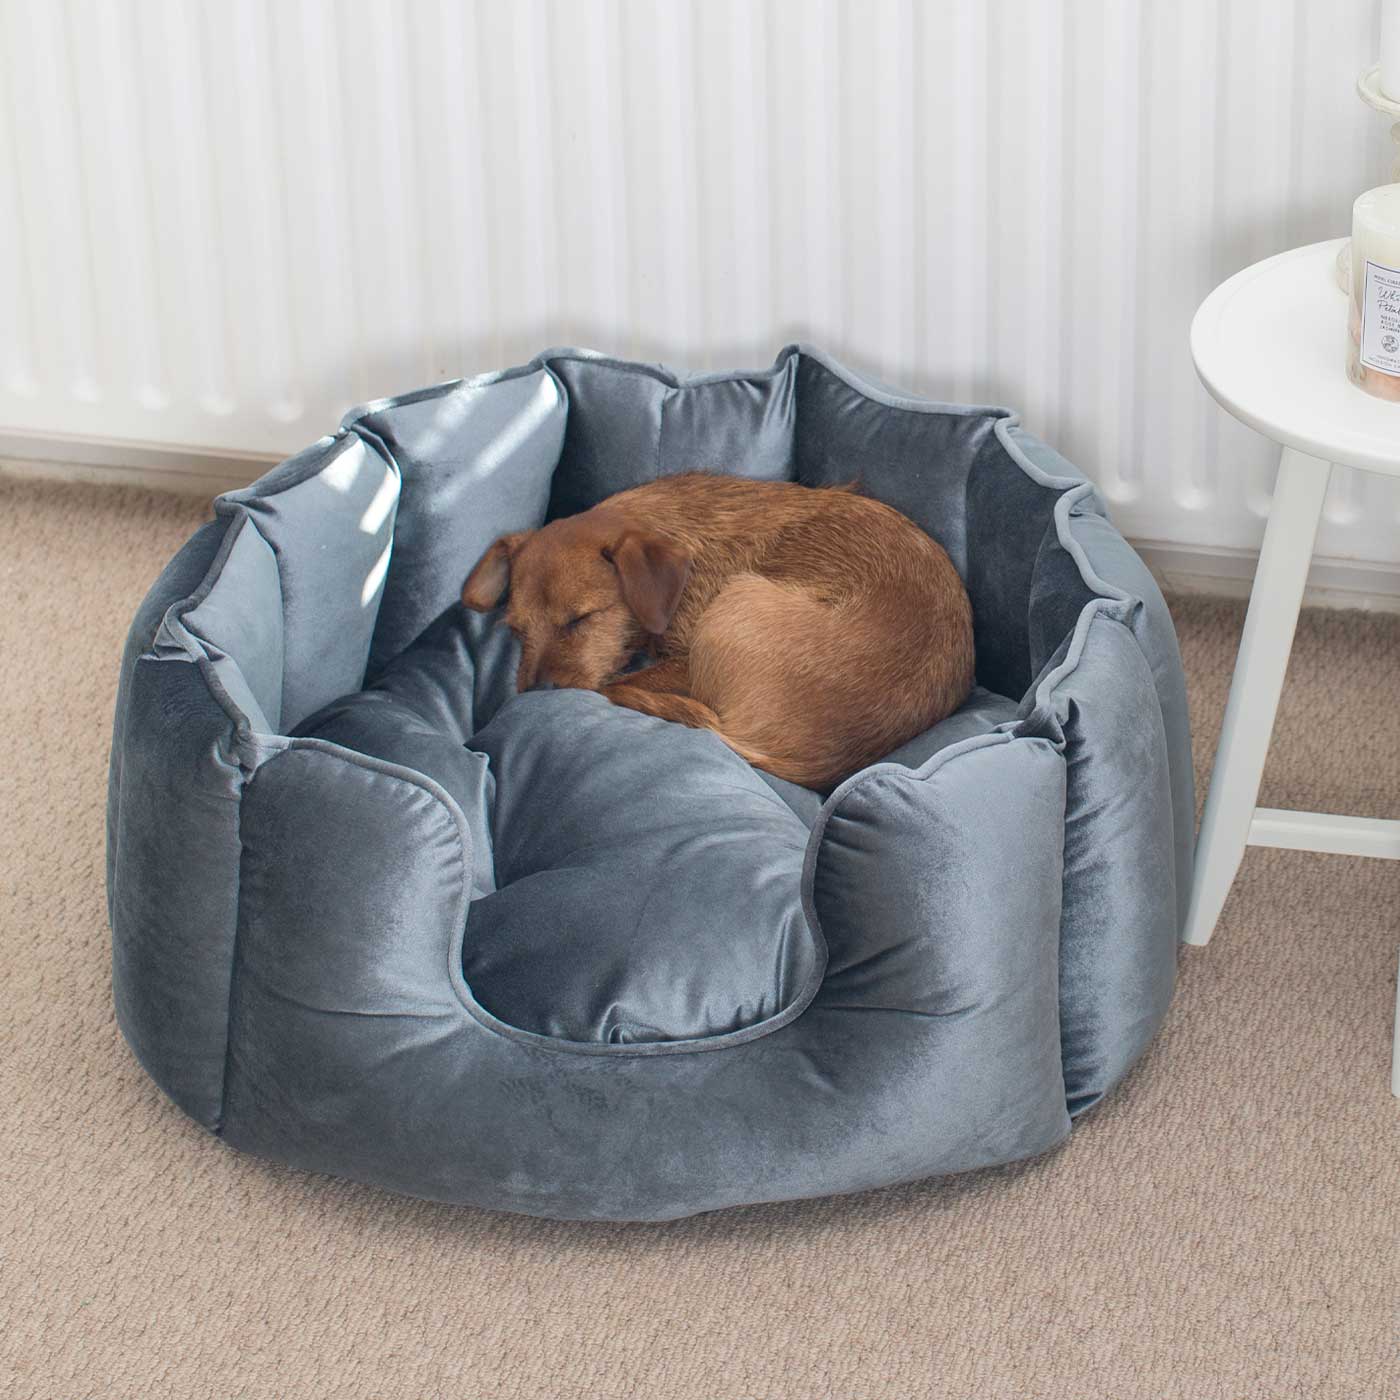 Discover Our Luxurious High Wall Velvet Bed For Dogs, Featuring inner pillow with plush teddy fleece on one side To Craft The Perfect Dogs Bed In Stunning Elephant Velvet! Available To Personalize Now at Lords & Labradors US